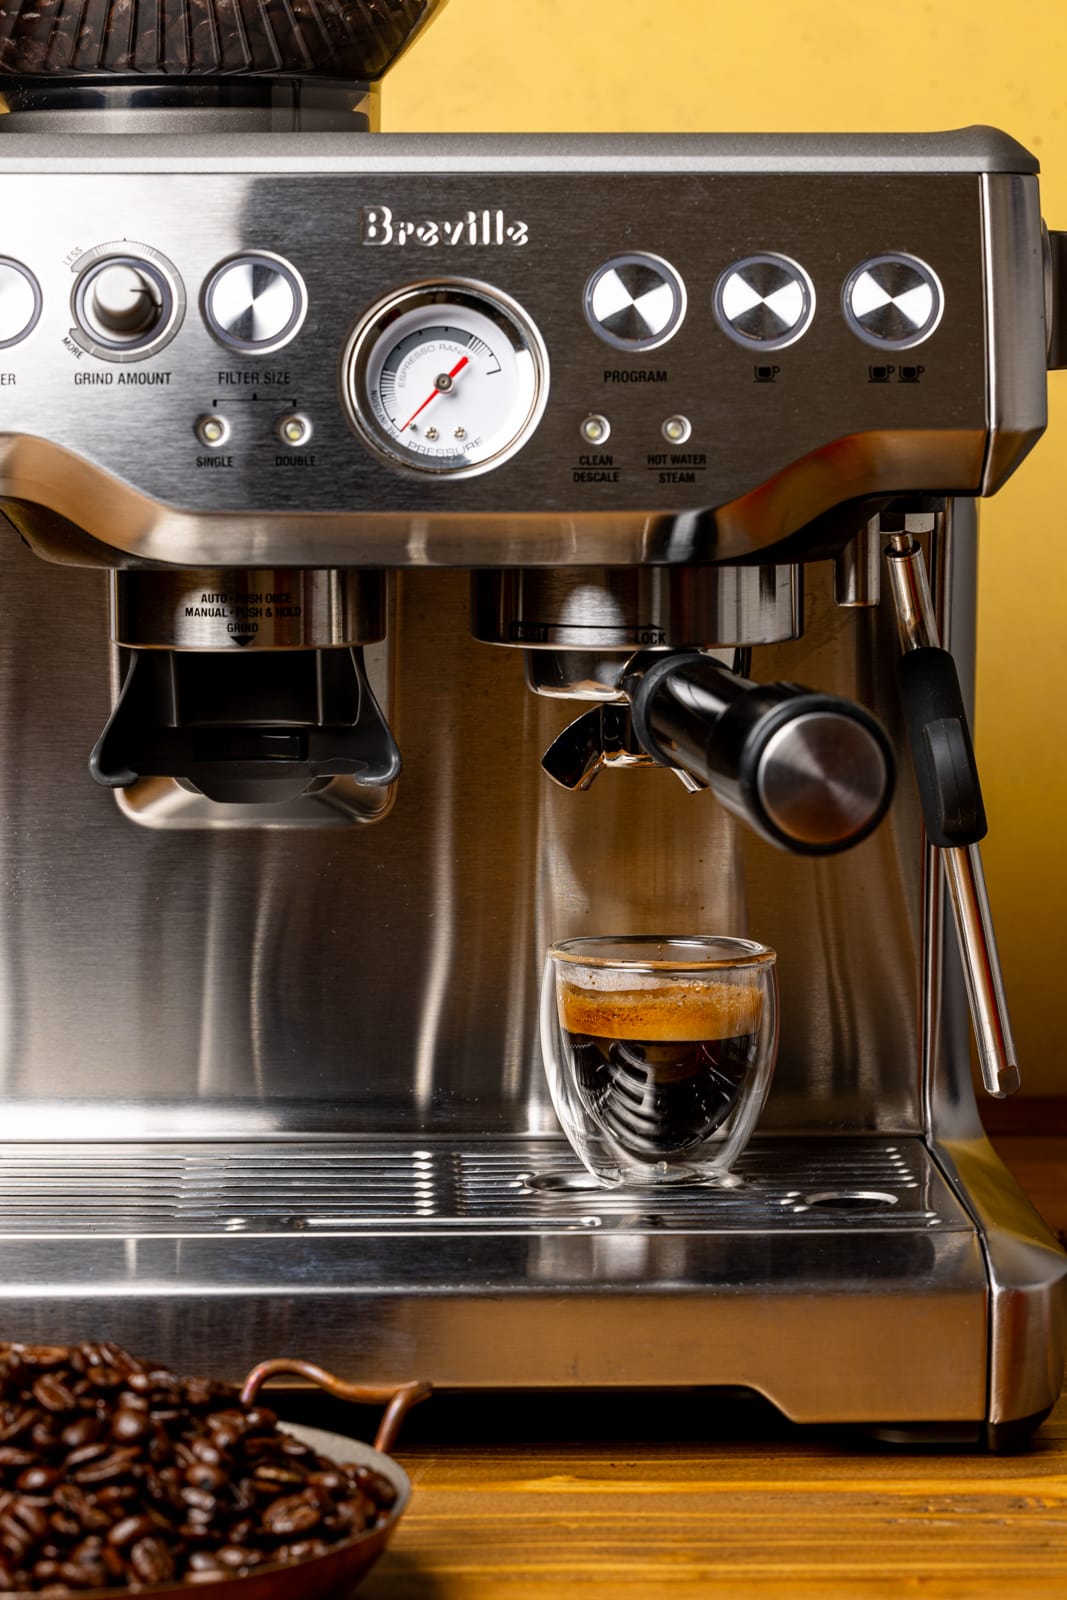 Espresso machine with cup and freshly-brewed espresso from coffee beans.